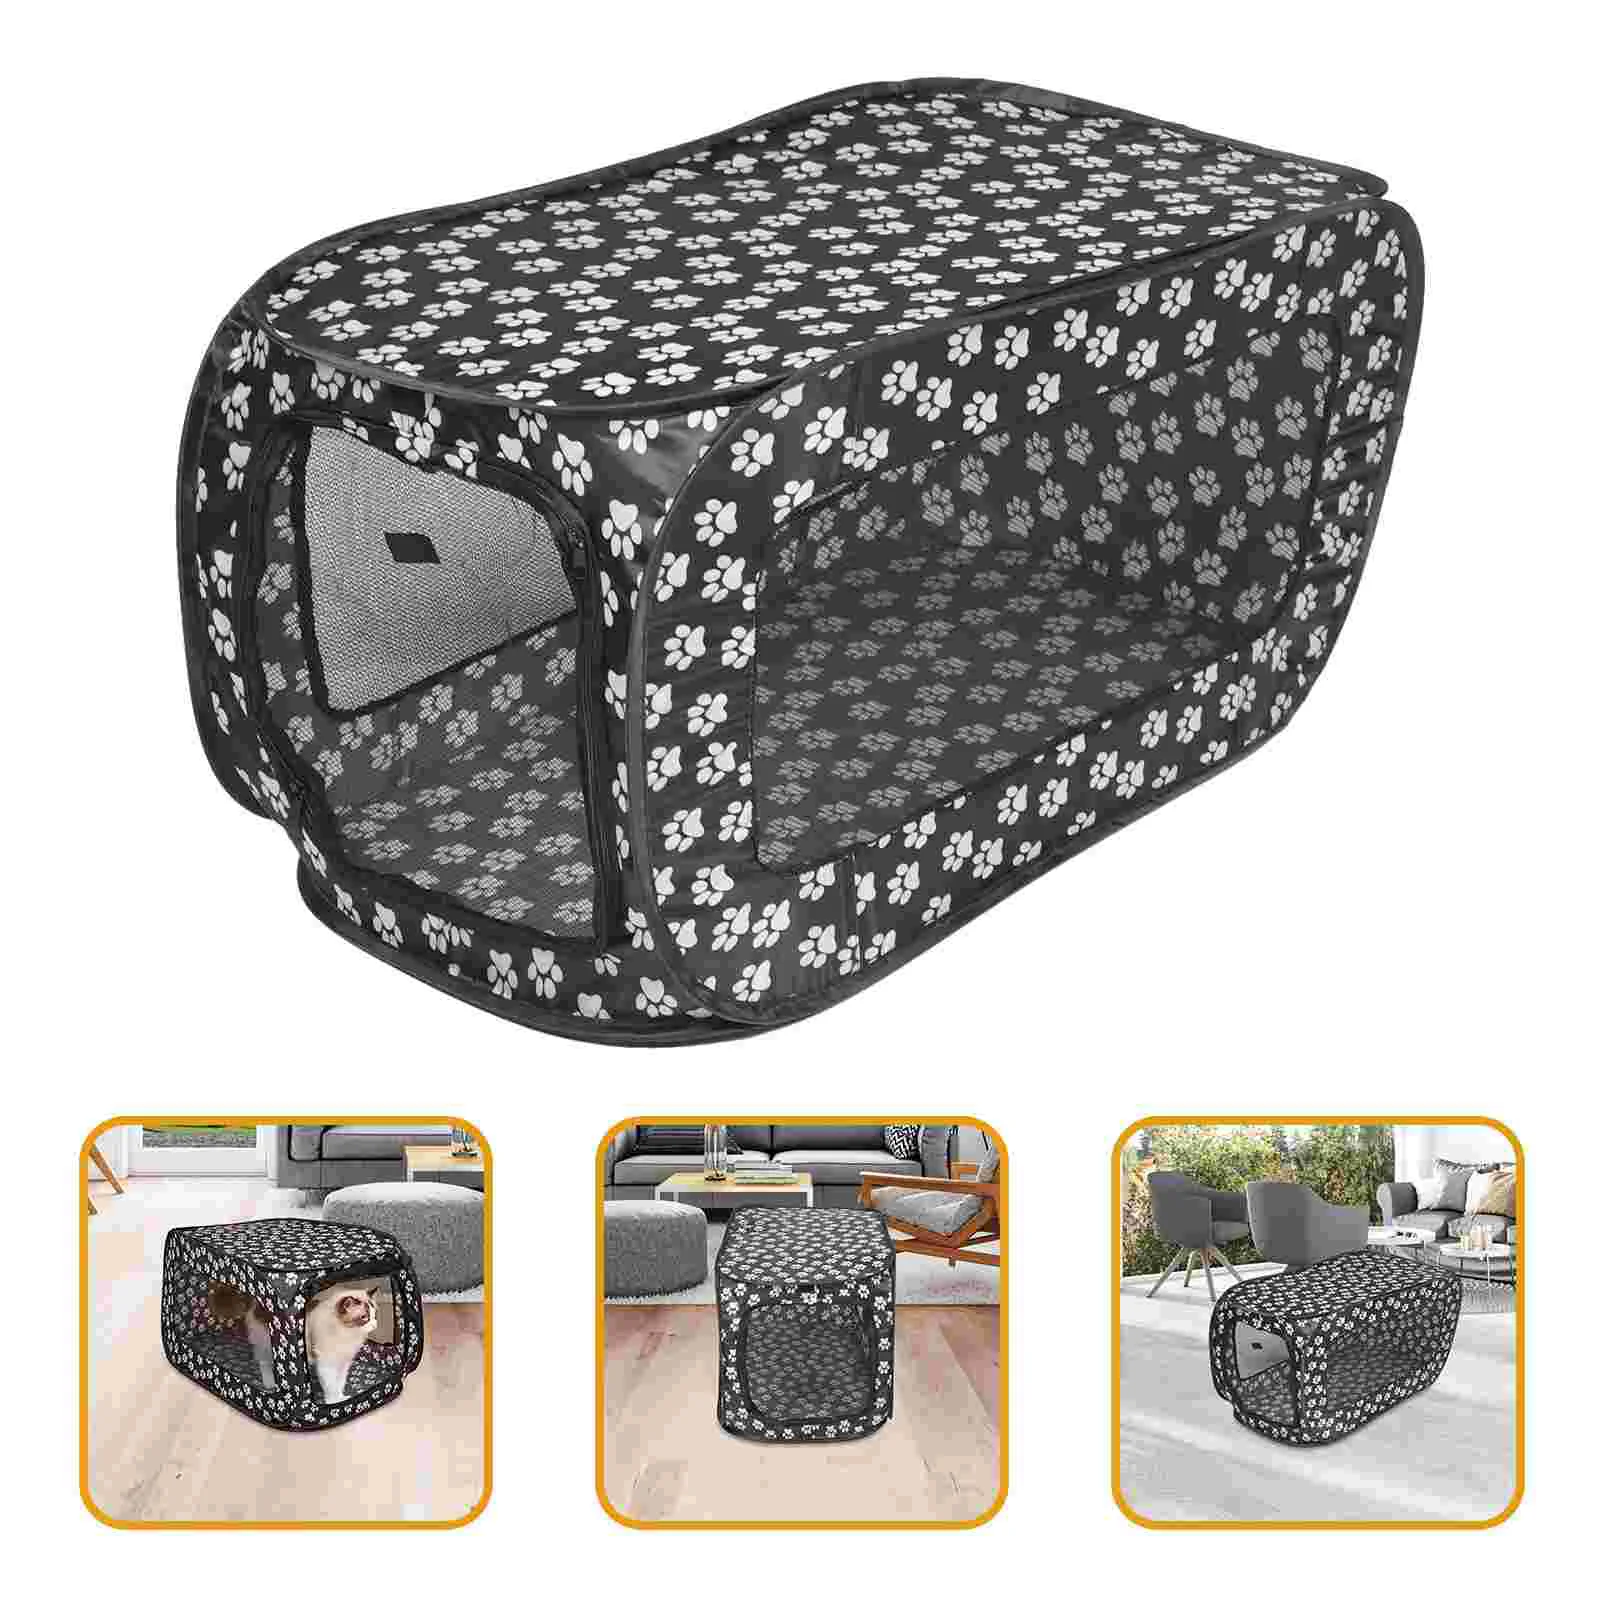 

Tent 600D Oxford Cloth House Cage Cat Sleeping Bed Foldable Fabric Crate Playpen Rectangular Tent for Puppy Kennel